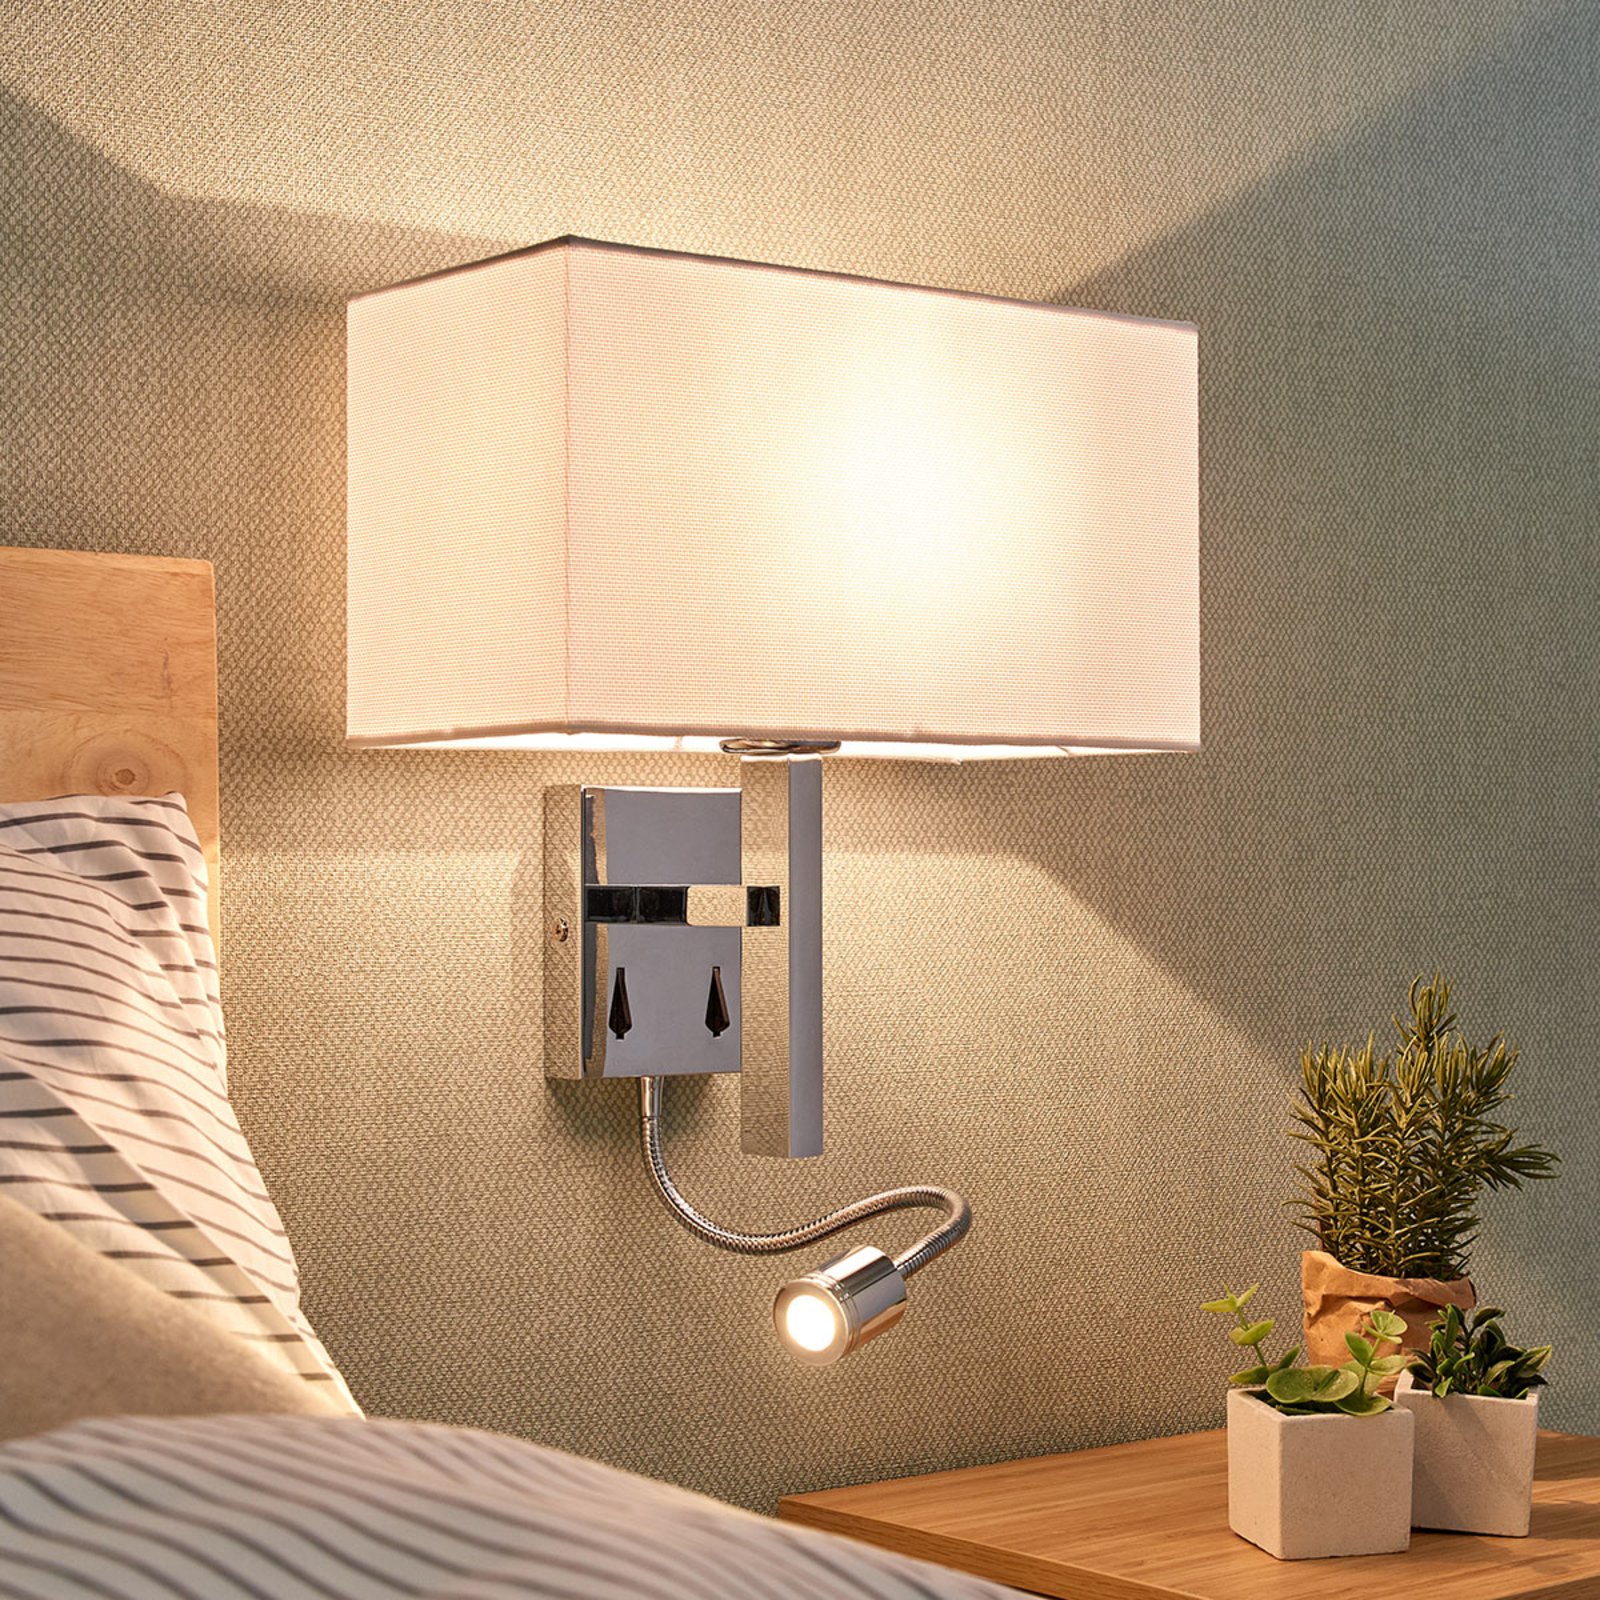 Reading arm wall light Pelto with two switches